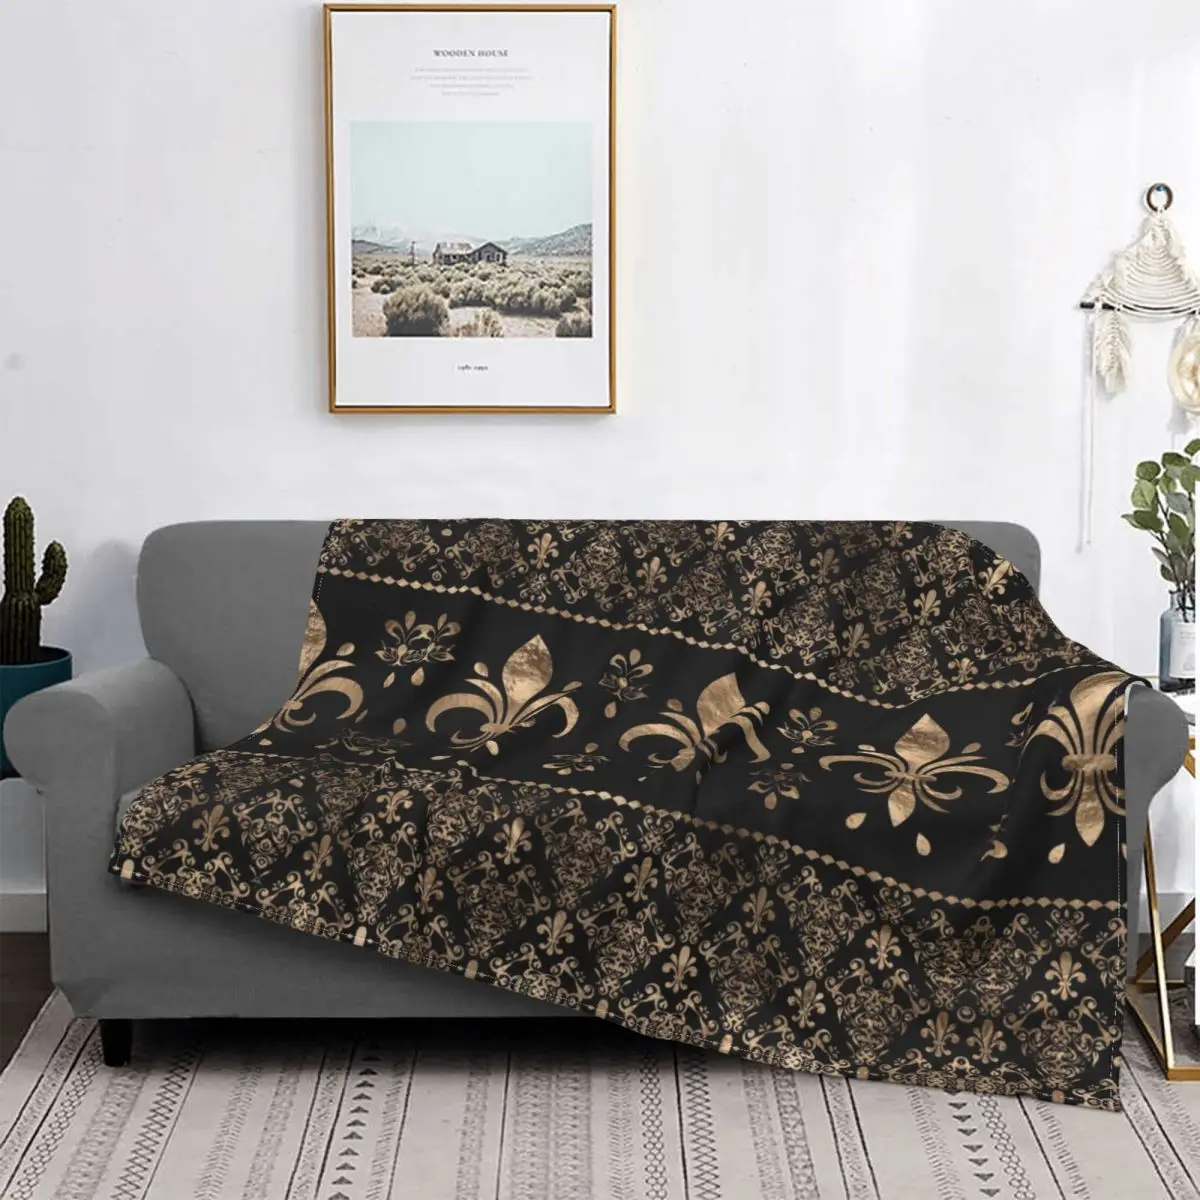 

Luxury Black And Gold Fleur De Lys Blankets Soft Flannel Sprint Lily Floral Fleur-de-Lis Throw Blanket for Couch Outdoor Bedding